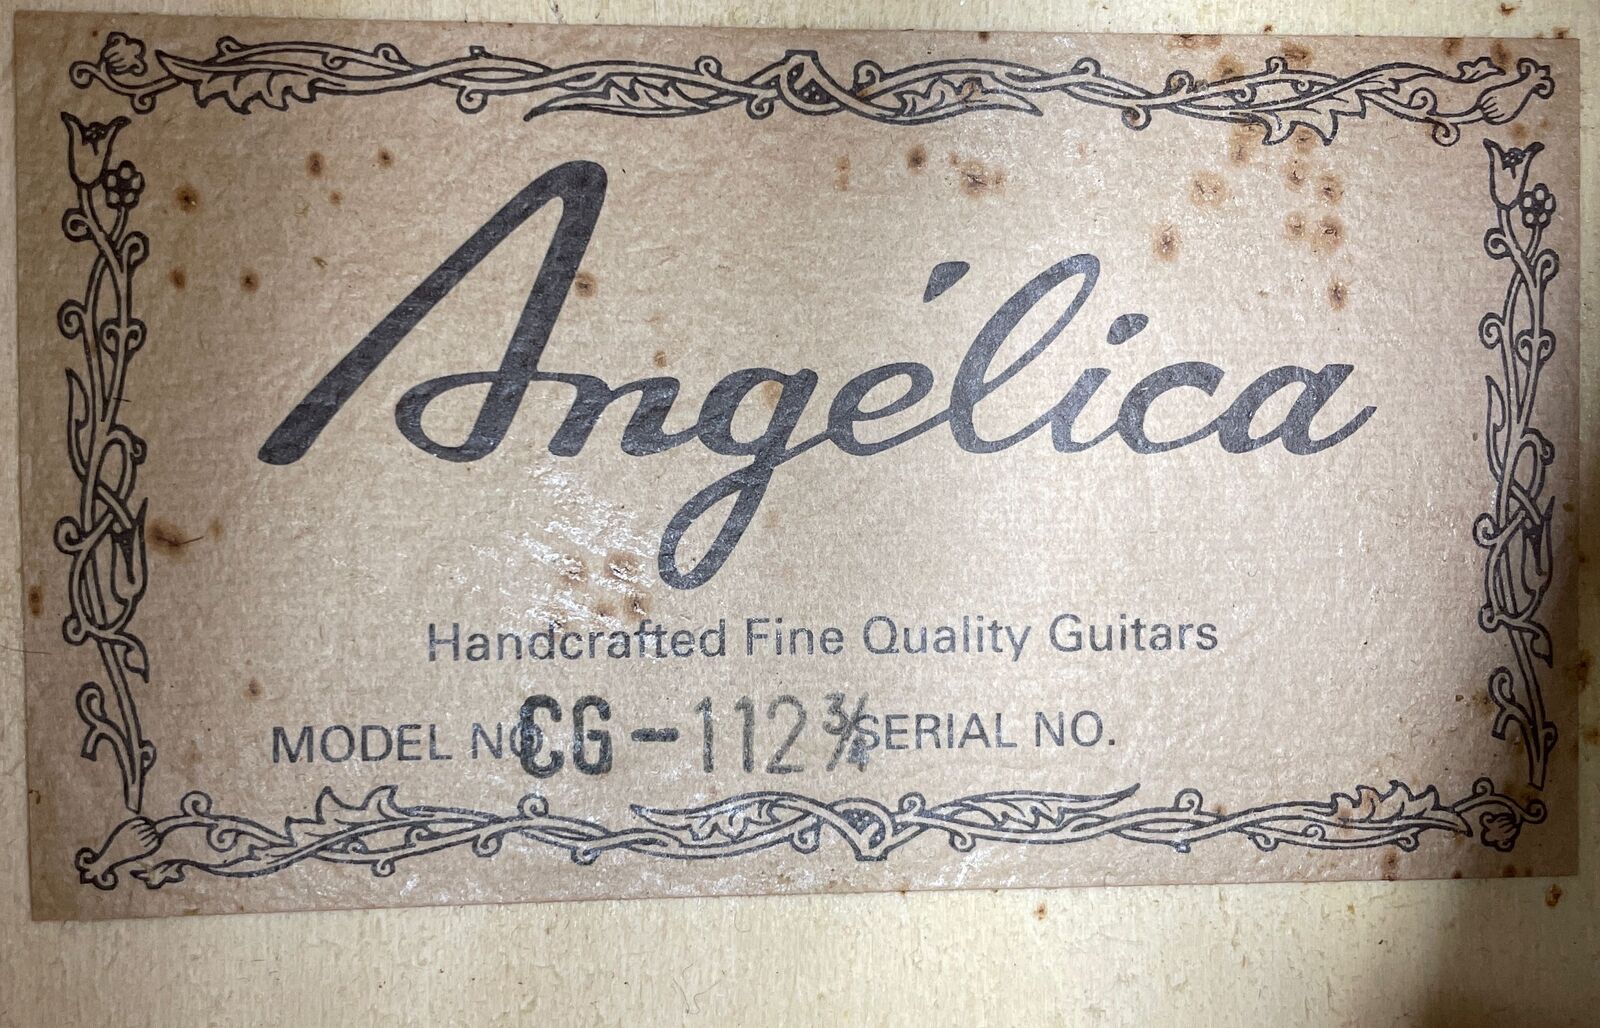 Angelica CG 112 3/4 1 Acoustic Guitar w Soft Case 9